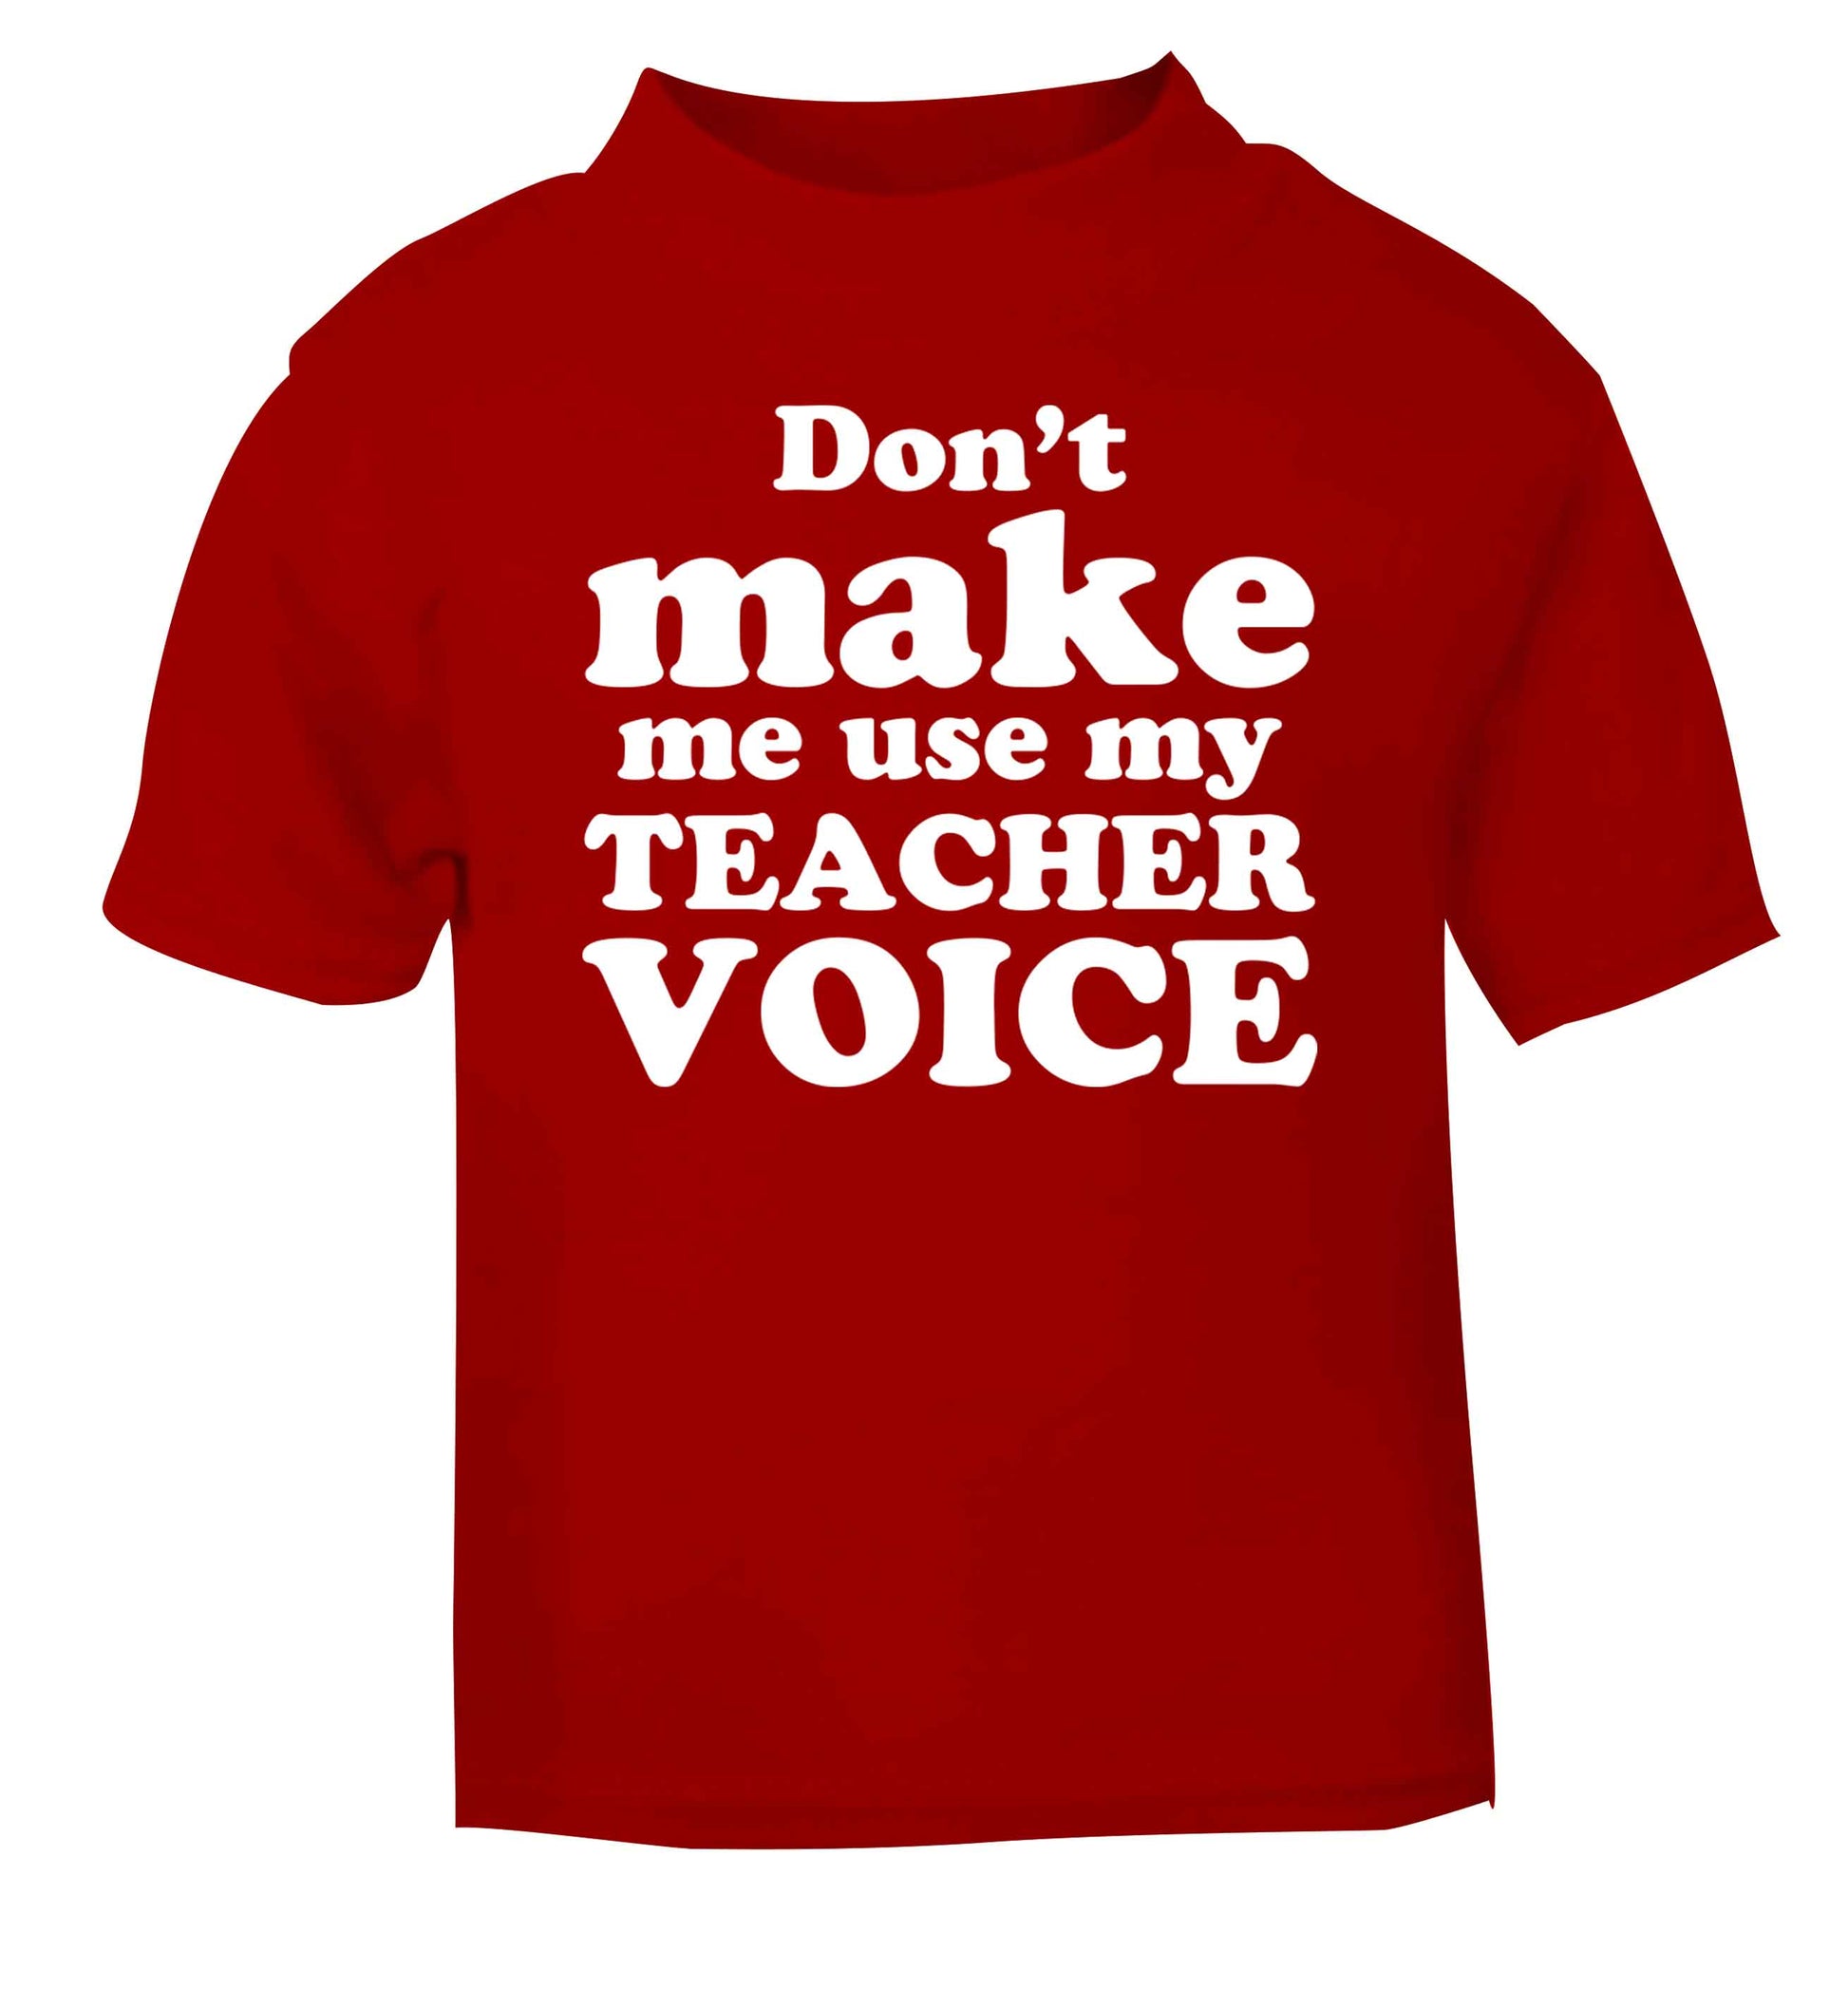 Don't make me use my teacher voice red baby toddler Tshirt 2 Years